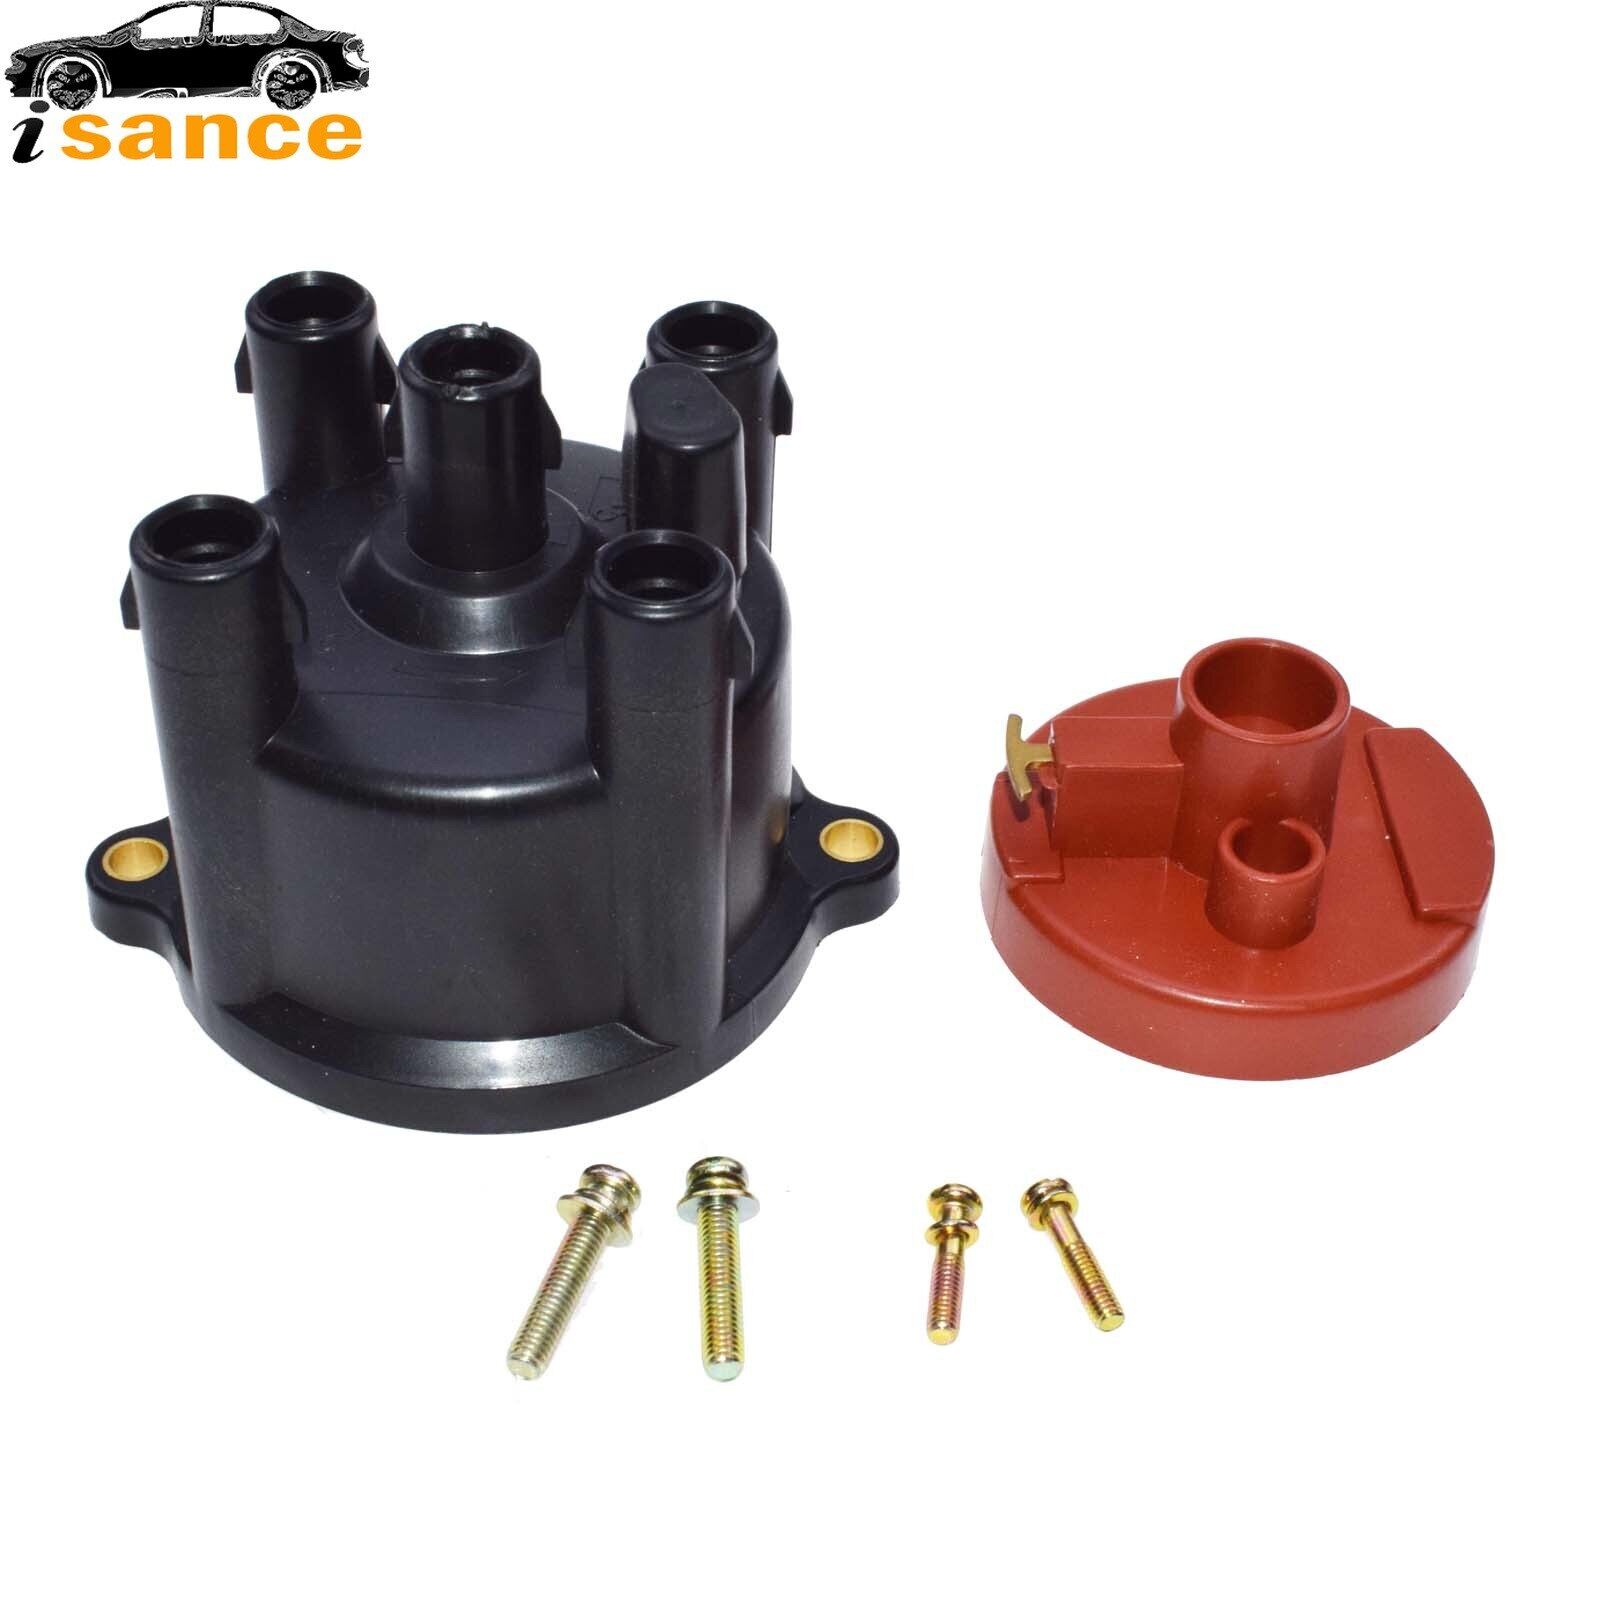 Tune Up Kit Distributor Rotor Cap & Spark Plugs Wire Set Compatible with Toyota MR2 2.2L L4 